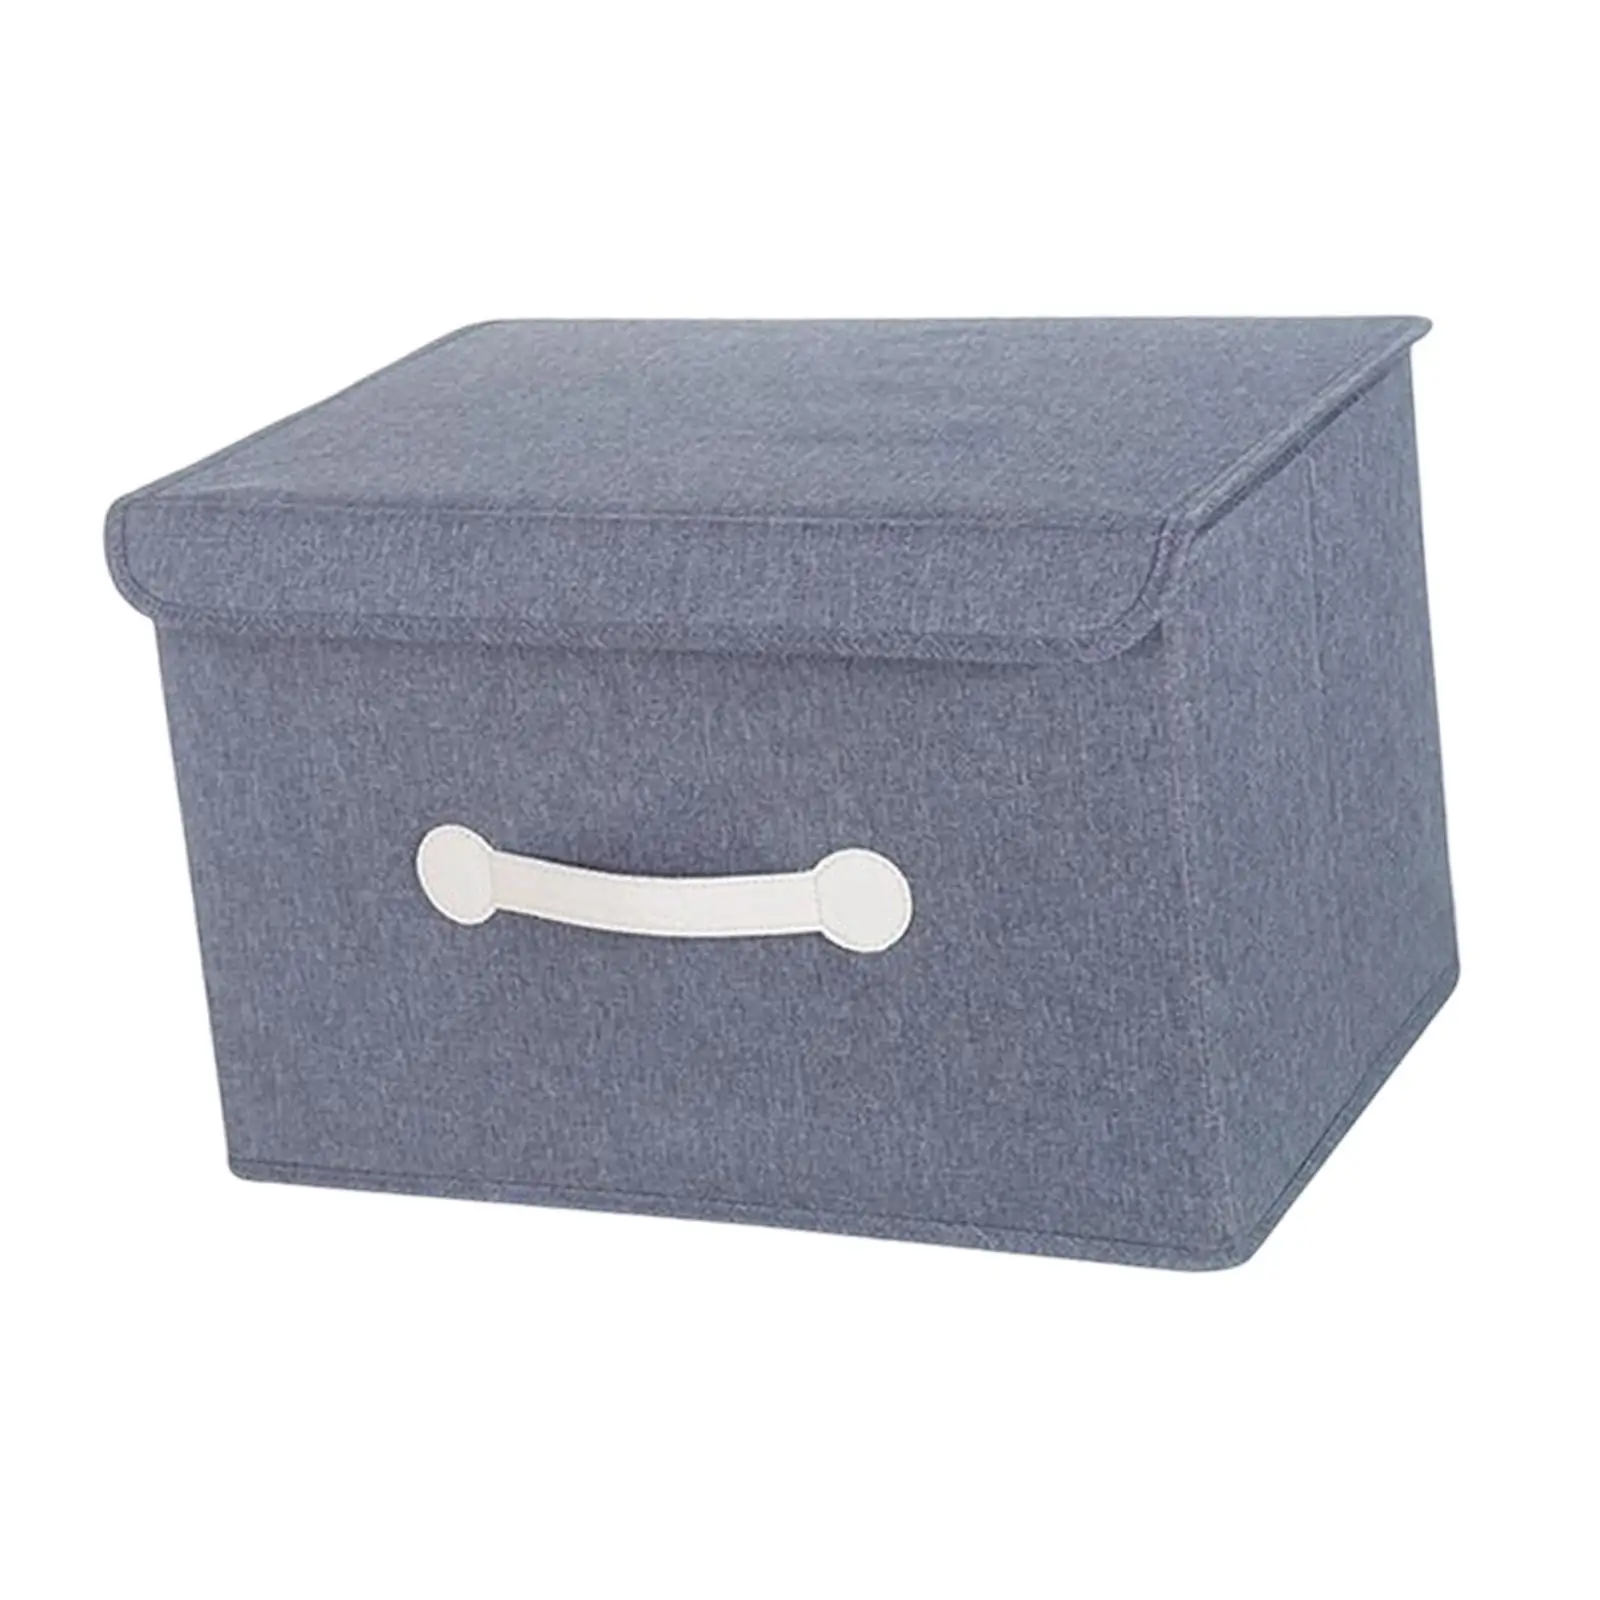 Foldable Storage Containers Basket Cube with Cover Storage Box Storage Bins for Shoes